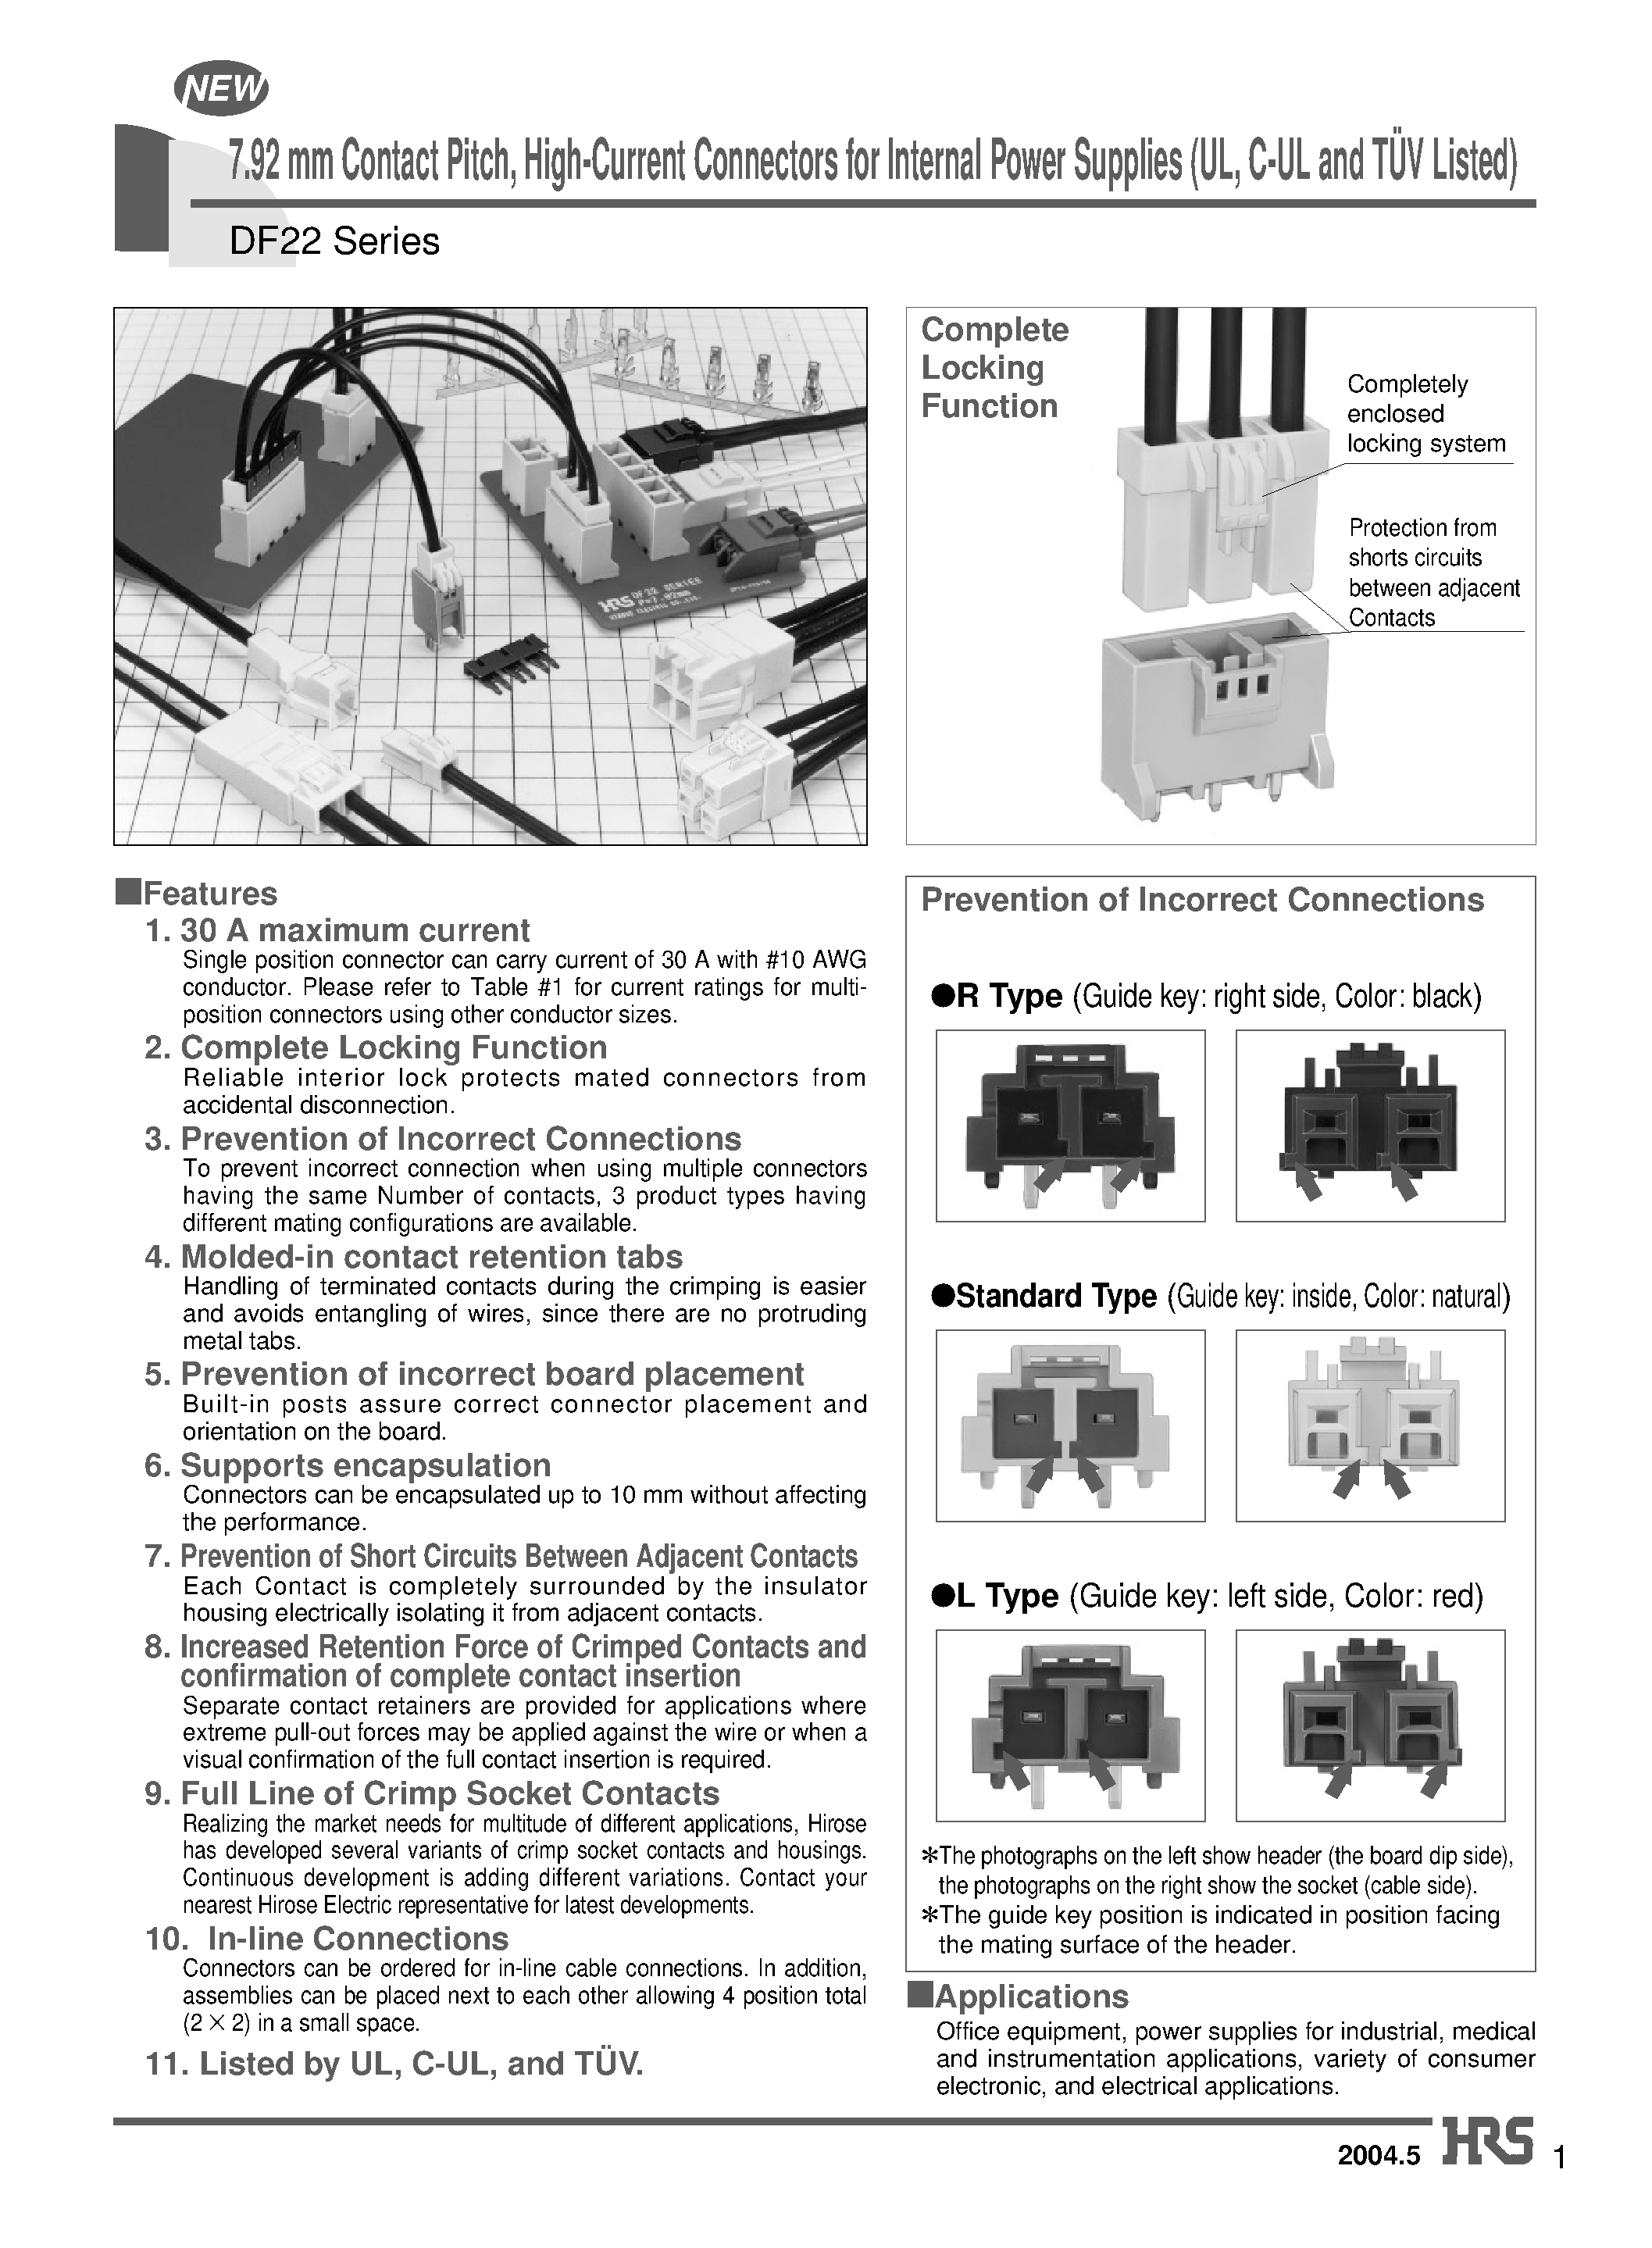 Datasheet DF22A-5S-7.92C - 7.92 mm Contact Pitch/ High-Current Connectors for Internal Power Supplies (UL/ C-UL and TUV Listed) page 1